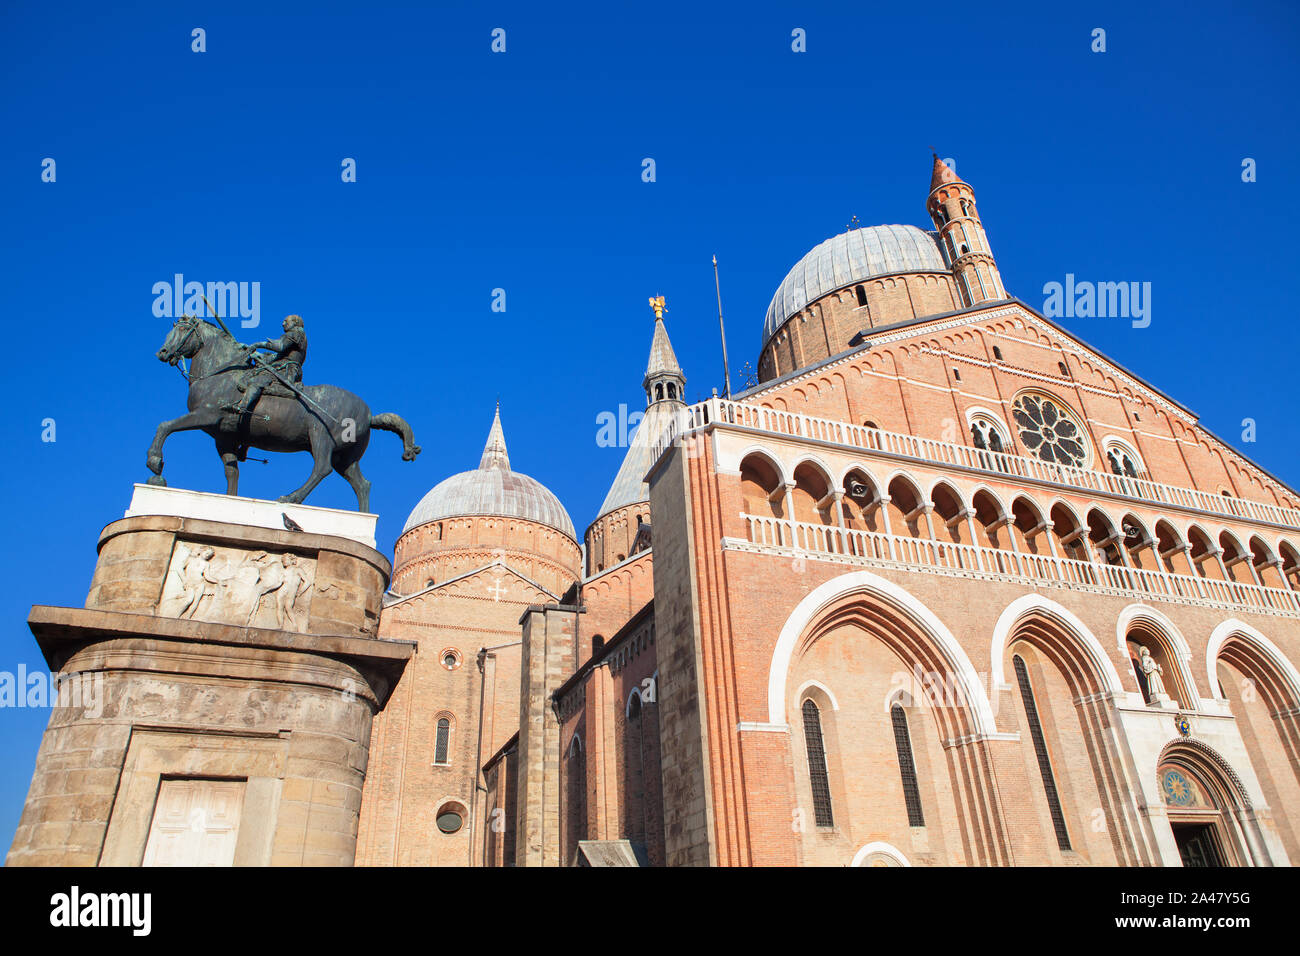 The Basilica of St Anthony and Equestrian statue of Gattamelata in Padua Italy Stock Photo